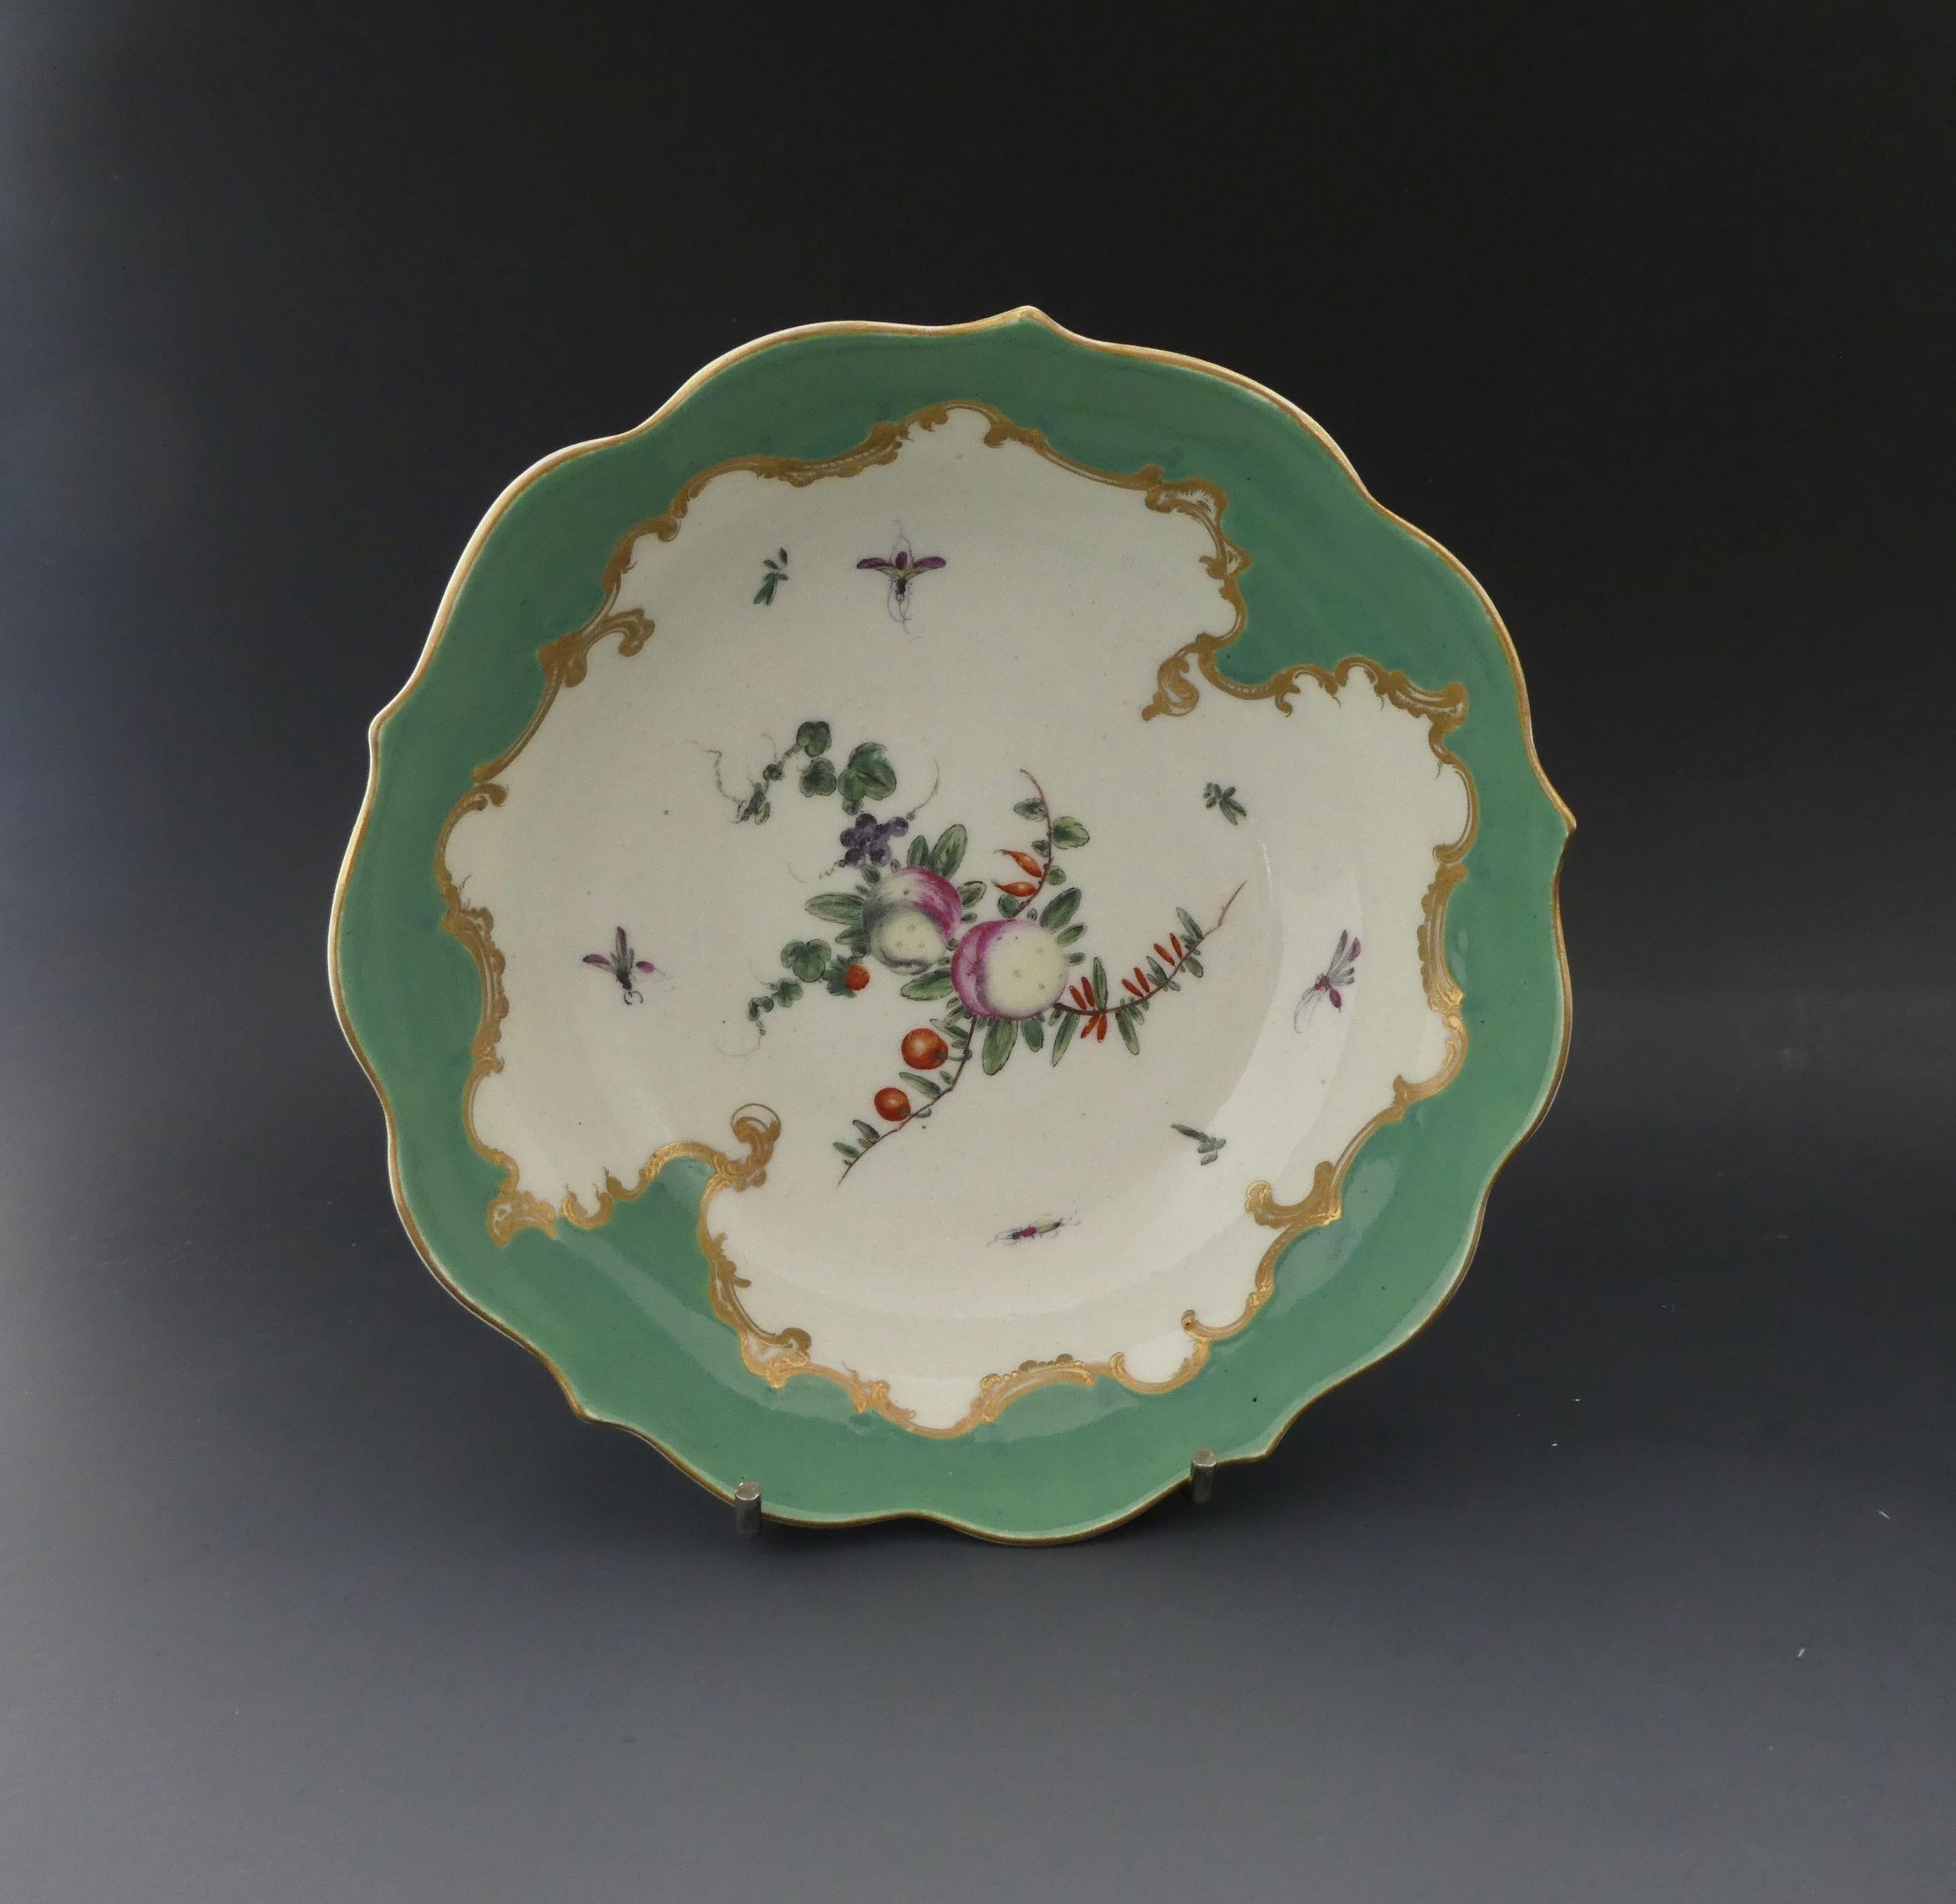 George III Worcester Porcelain Chocolate Cup and Saucer, ‘Spotted Fruit’ Painter